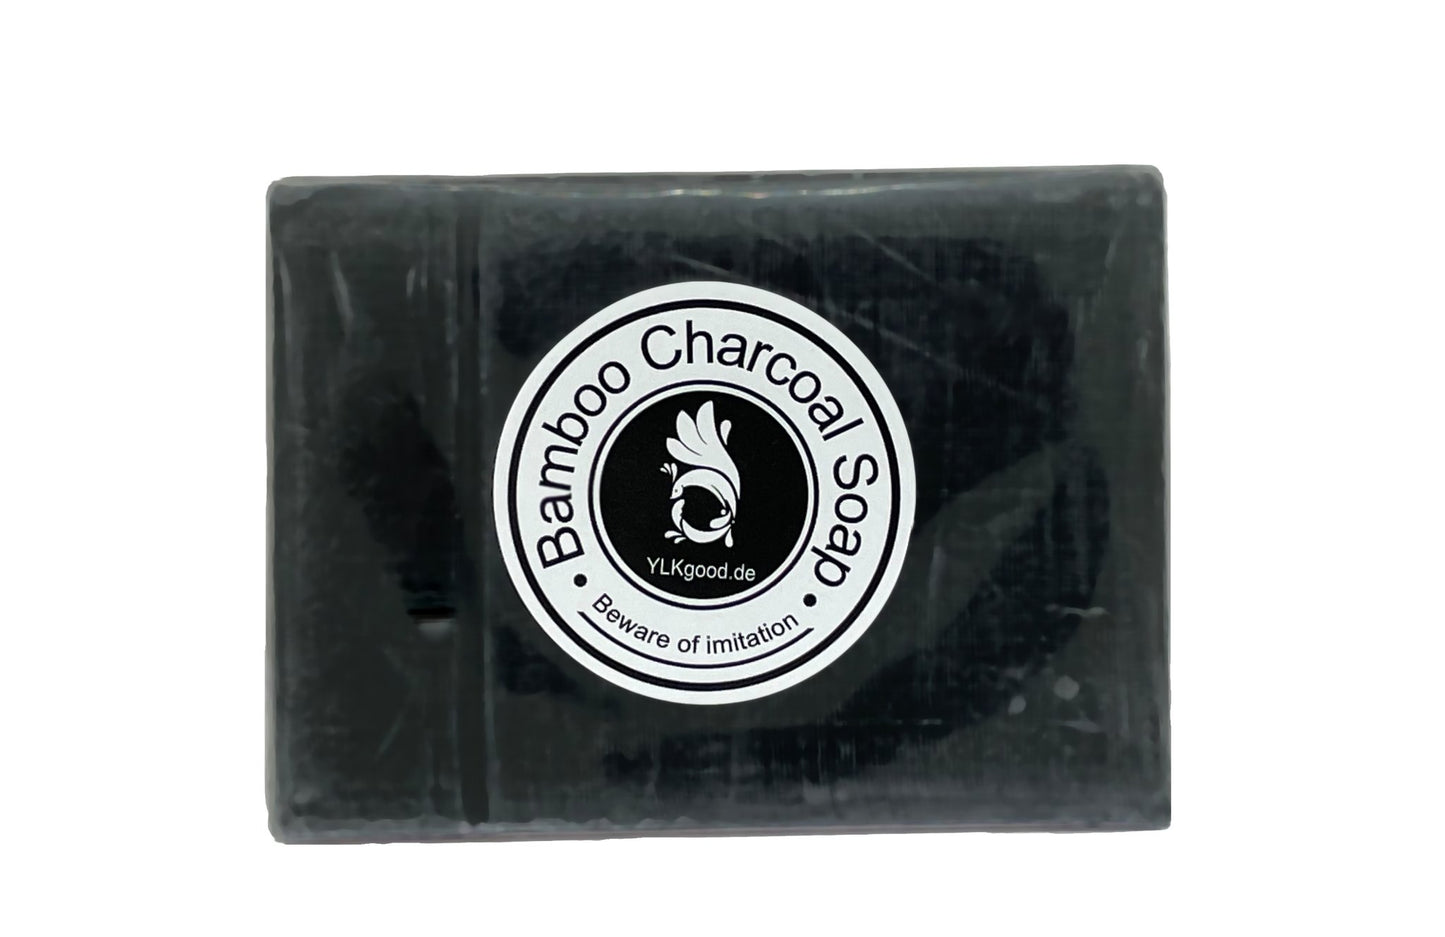 Bamboo Charcoal Soap | 100g Original YLKgood anti-bacterial anti-acne soap - YLKgood